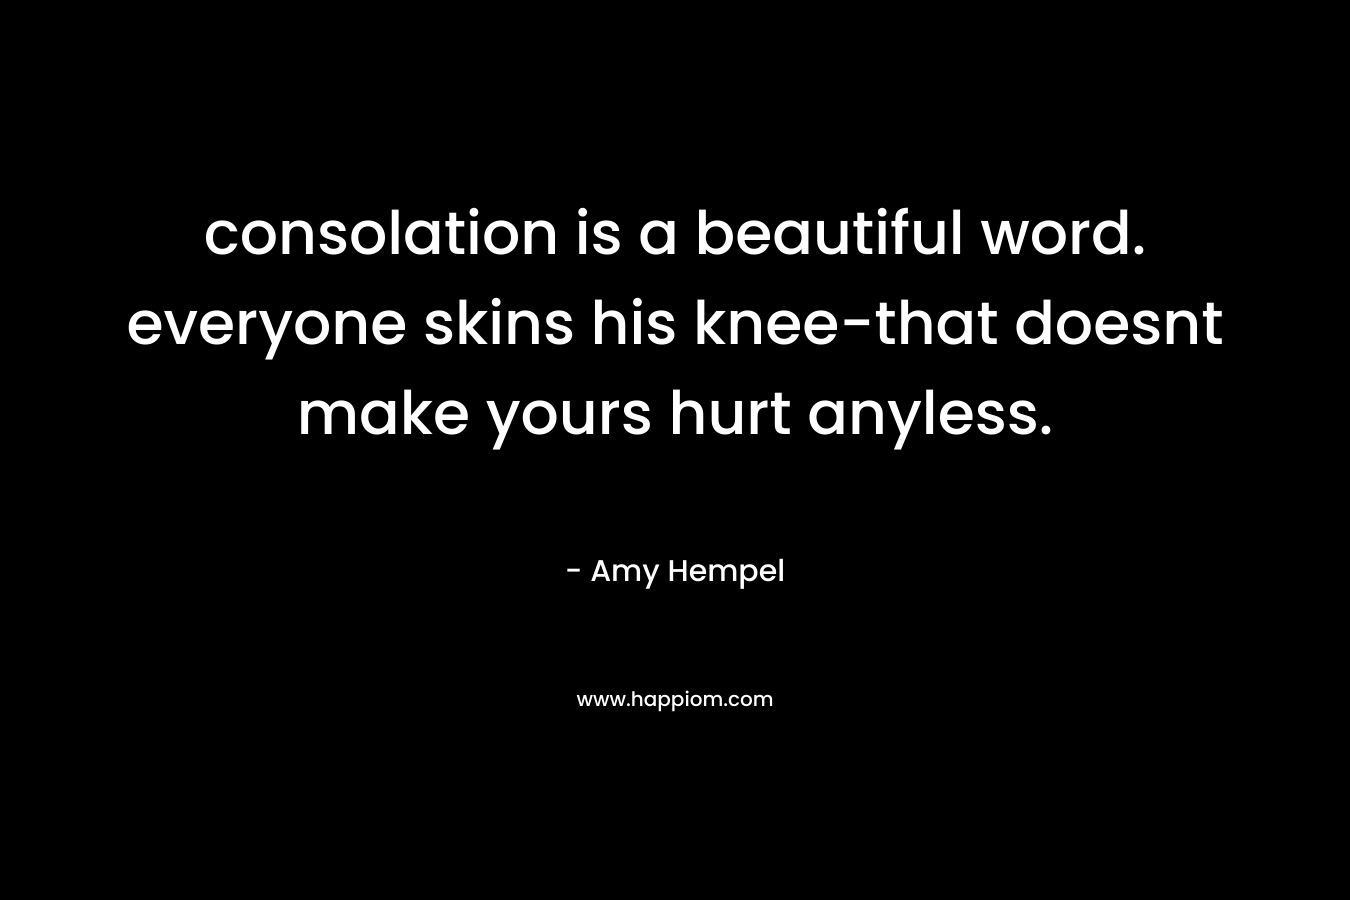 consolation is a beautiful word. everyone skins his knee-that doesnt make yours hurt anyless.